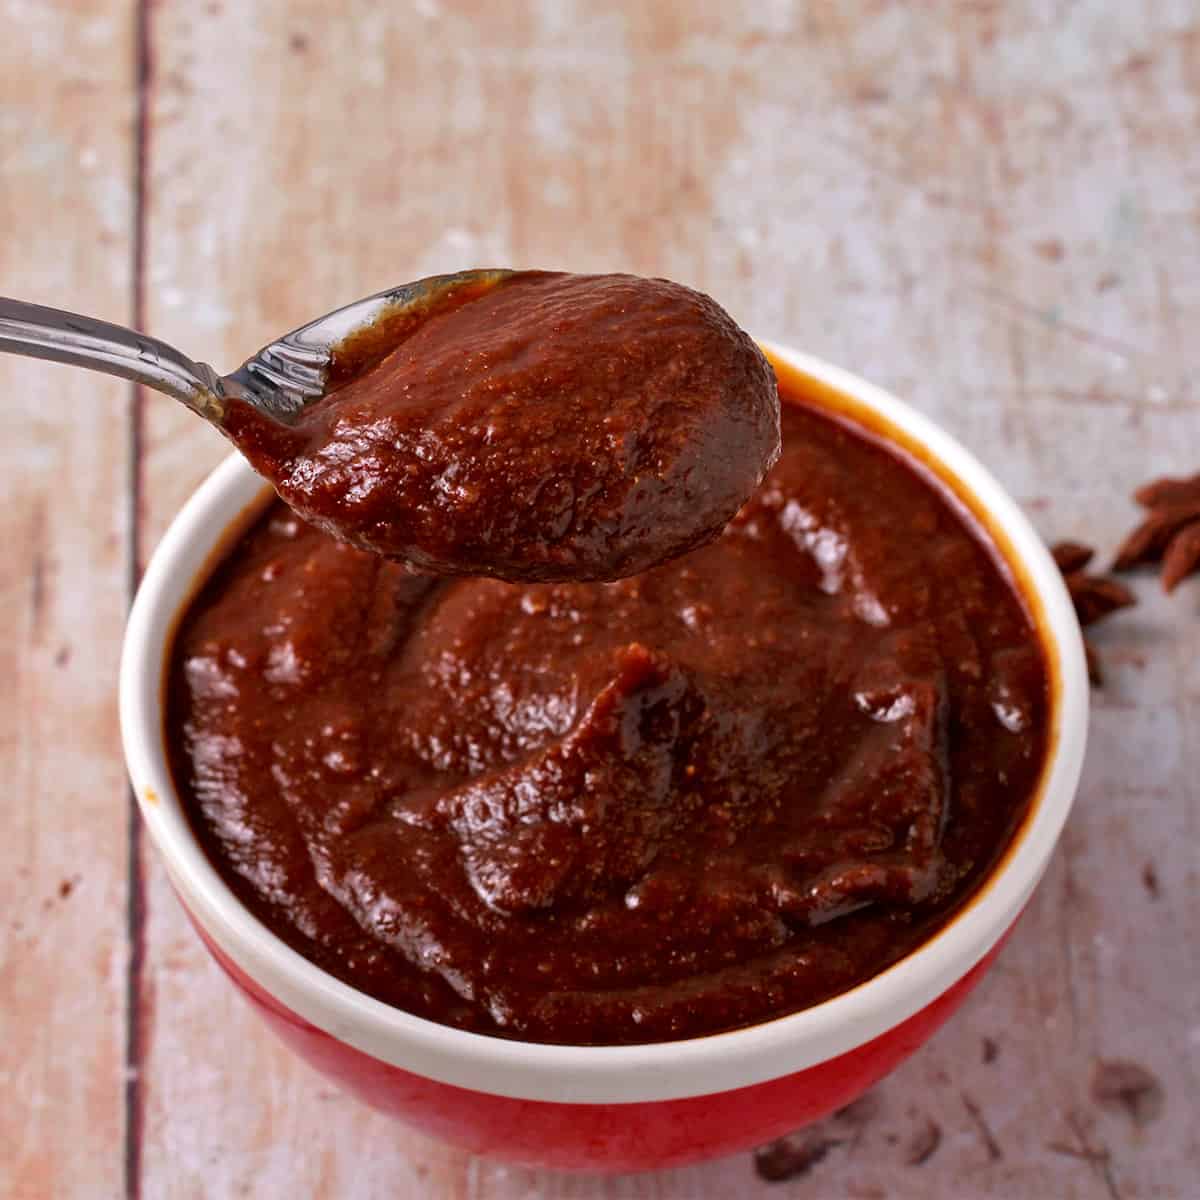 A spoonful of homemade hoisin sauce is lifted over a red bowl filled with sauce.